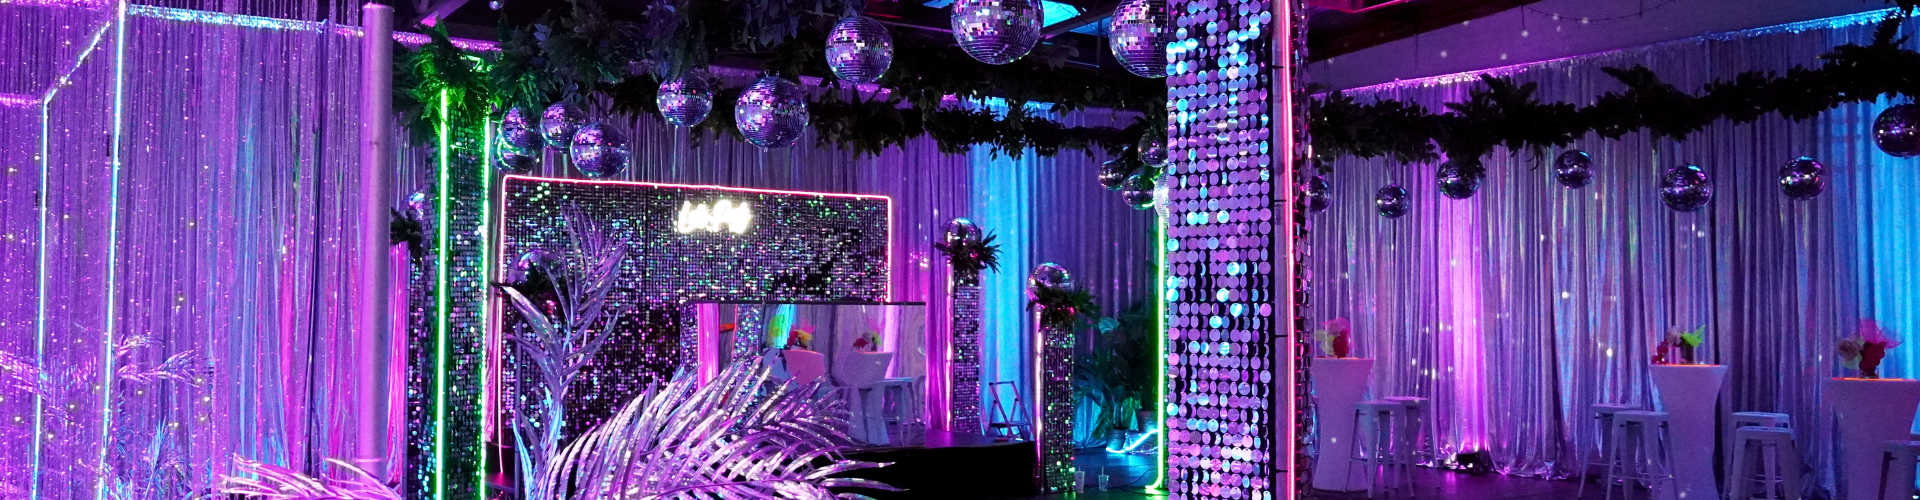 Themed event lighting hire Melbourne